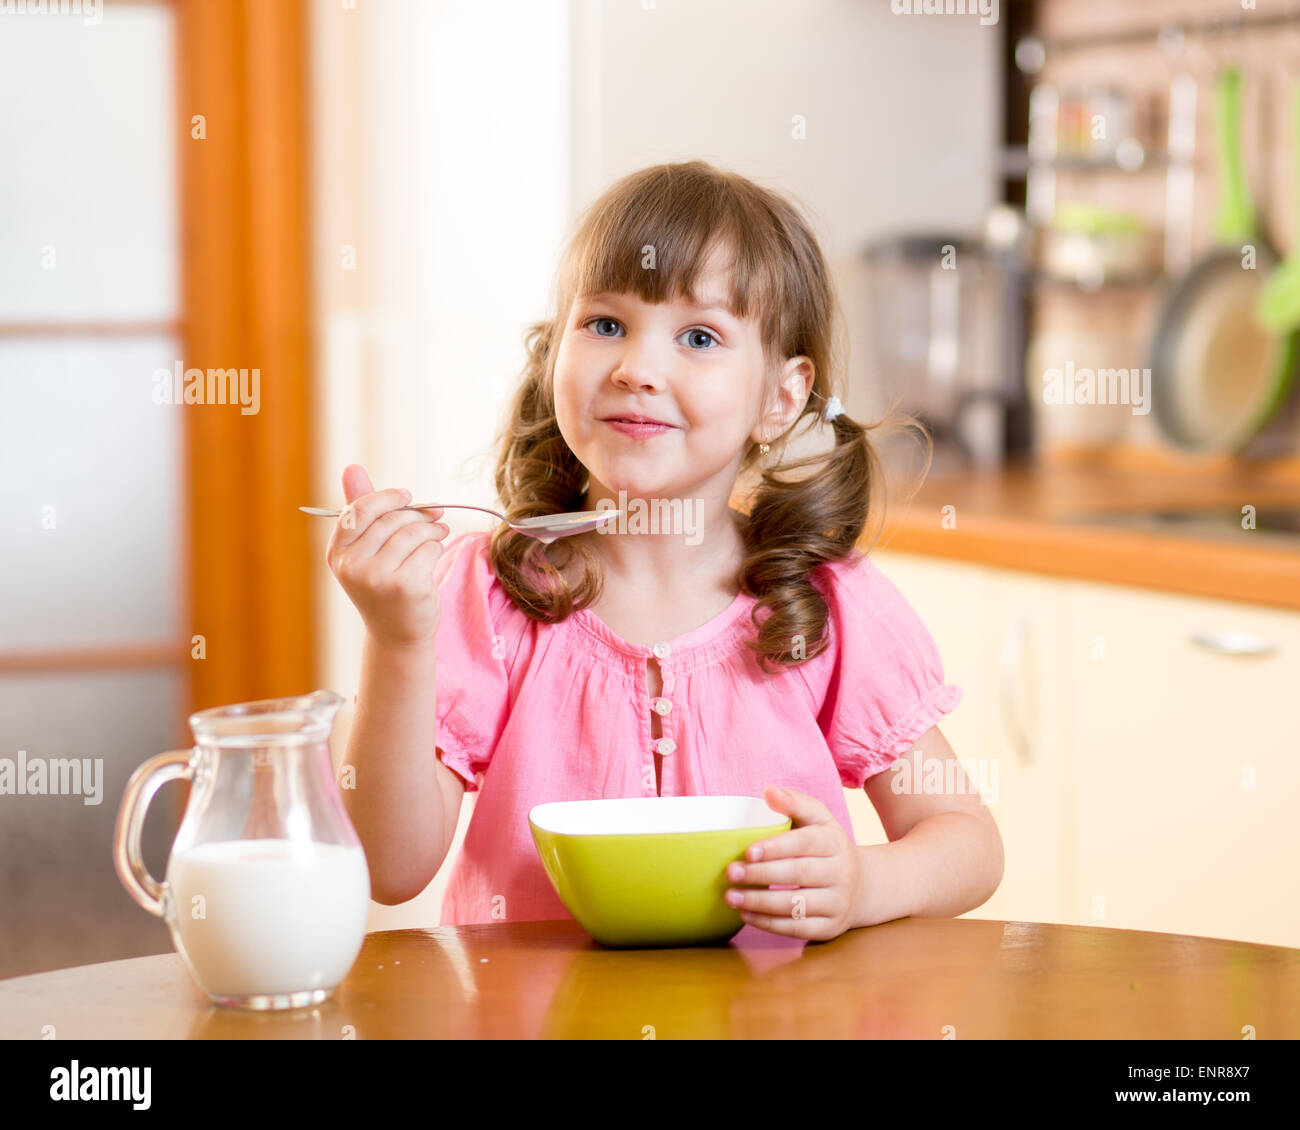 Kid girl eating healthy food in kitchen Banque D'Images